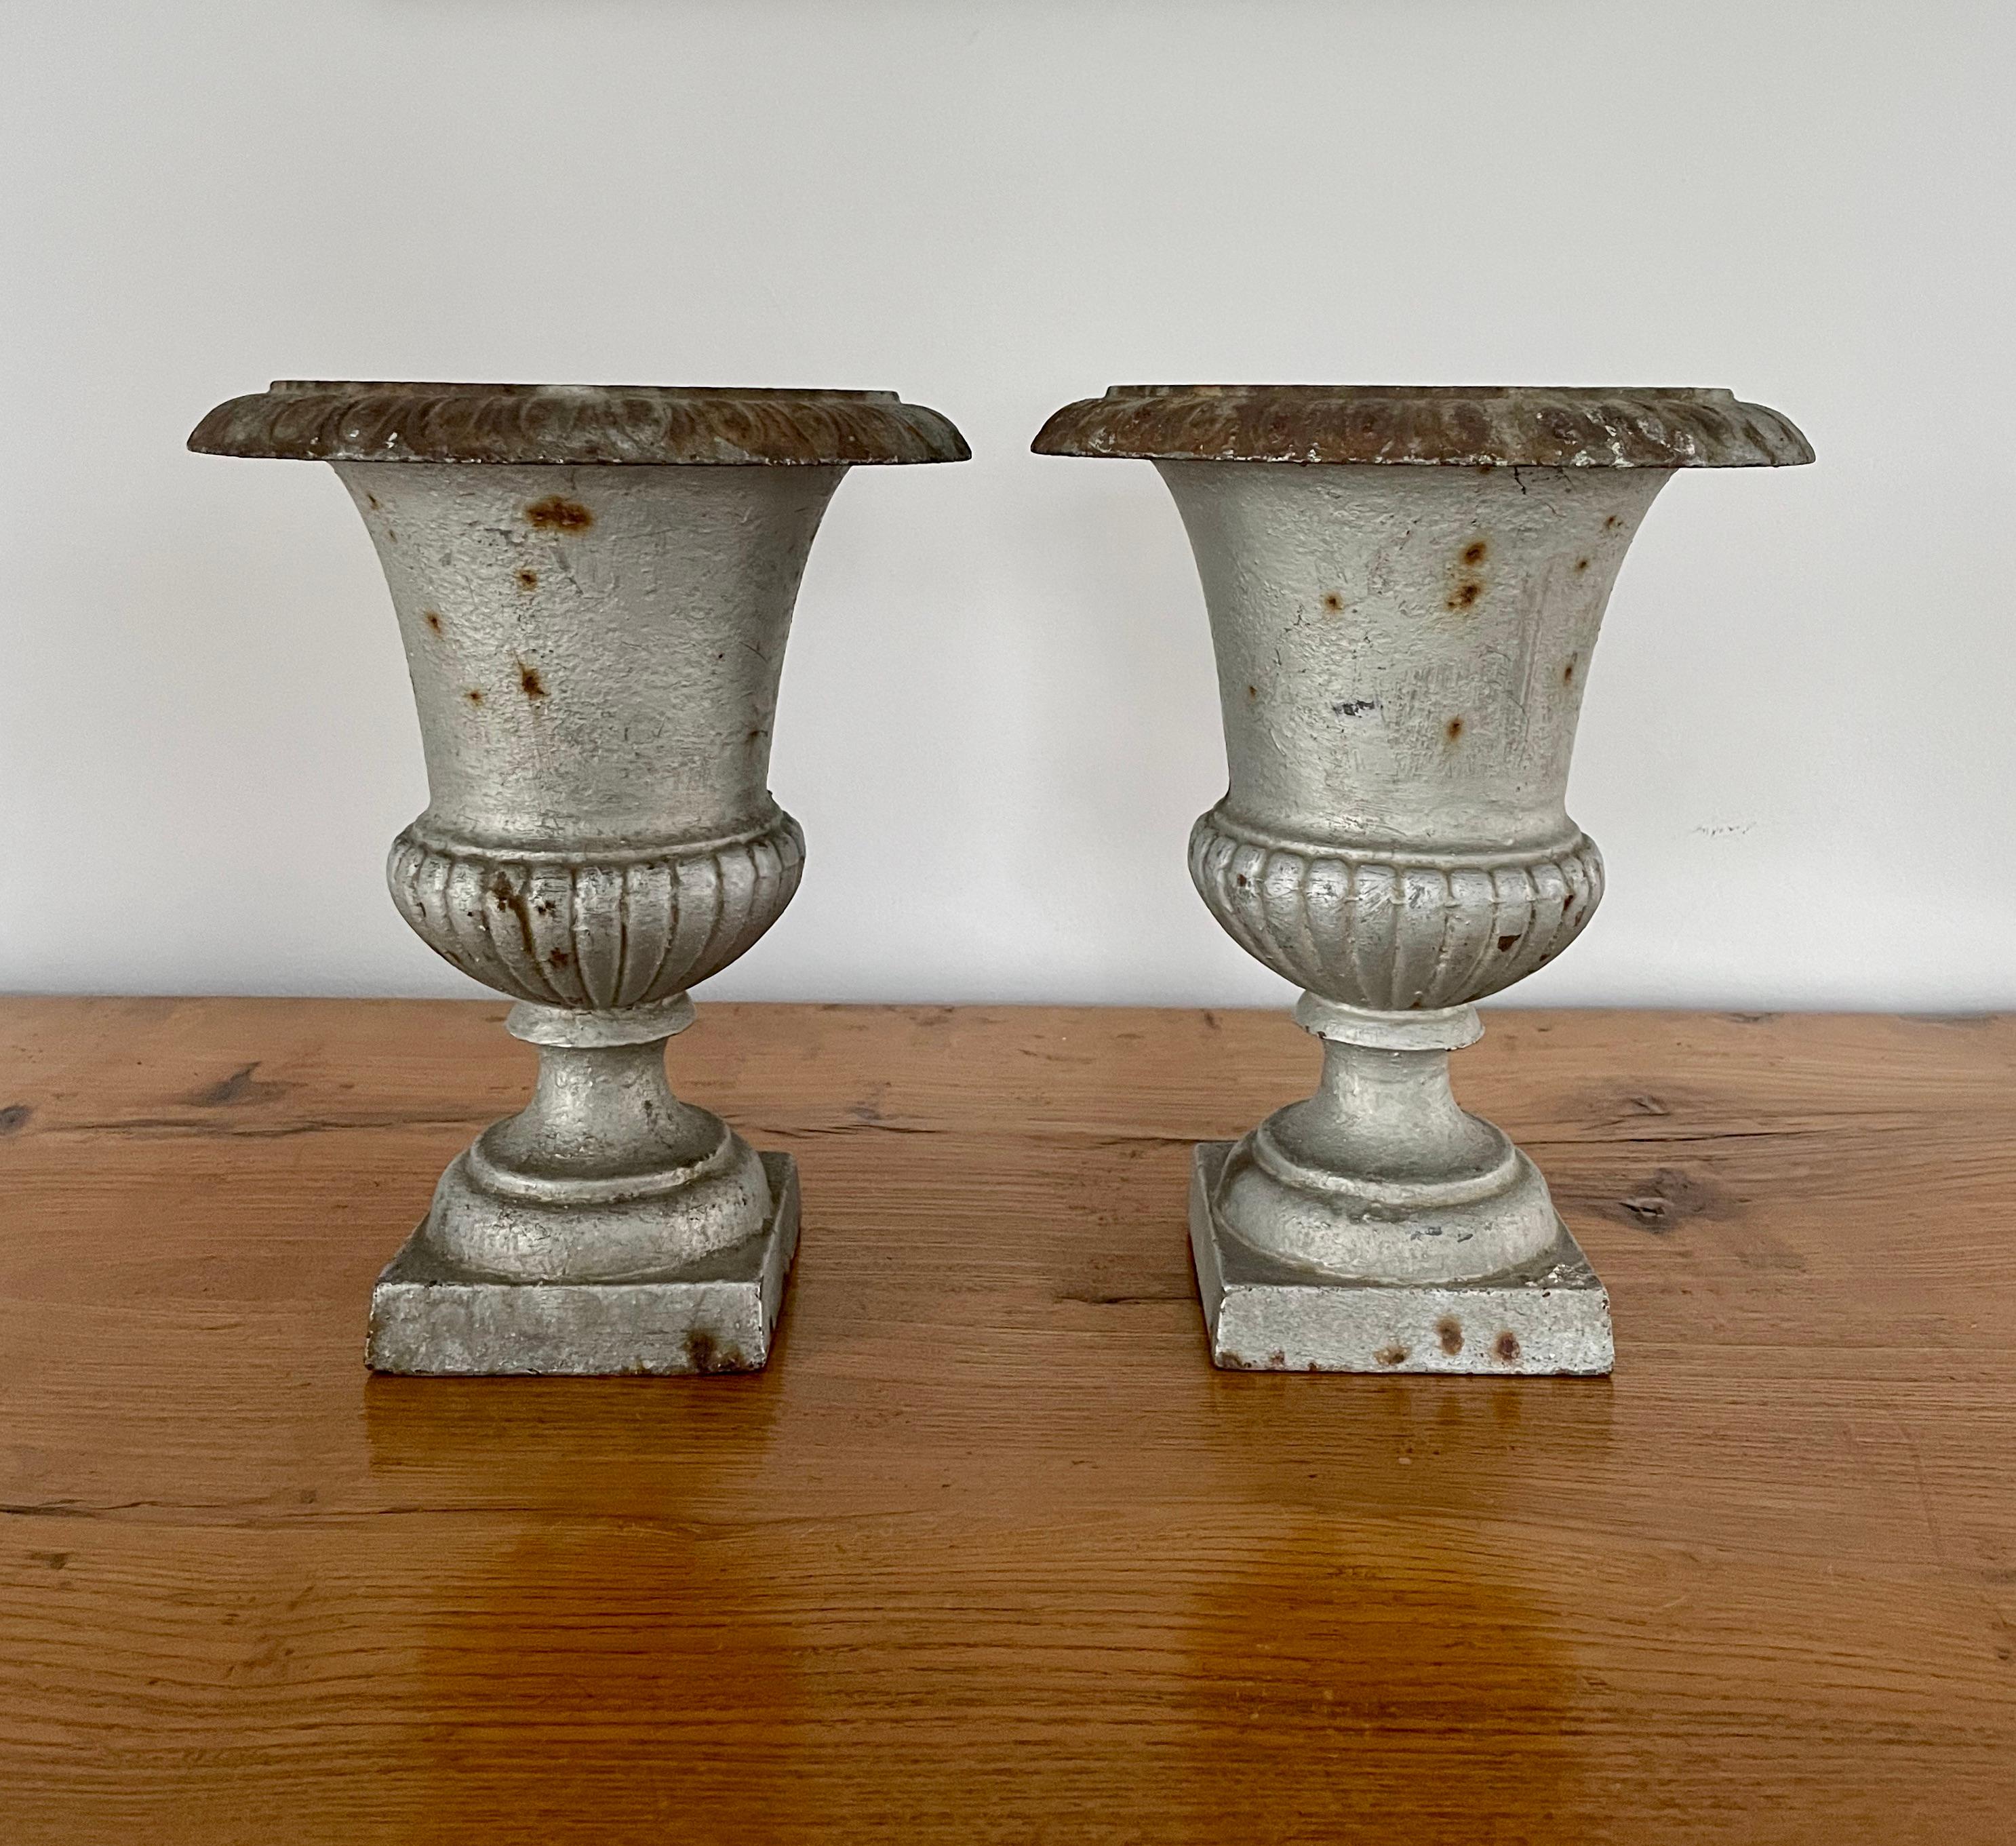 These classic cast iron campana urns are in their original aluminum paint with traces of surface rust and are in perfect condition. Elegant in form, they would make a lovely addition to your dining table tableau either with small pots of lavender or